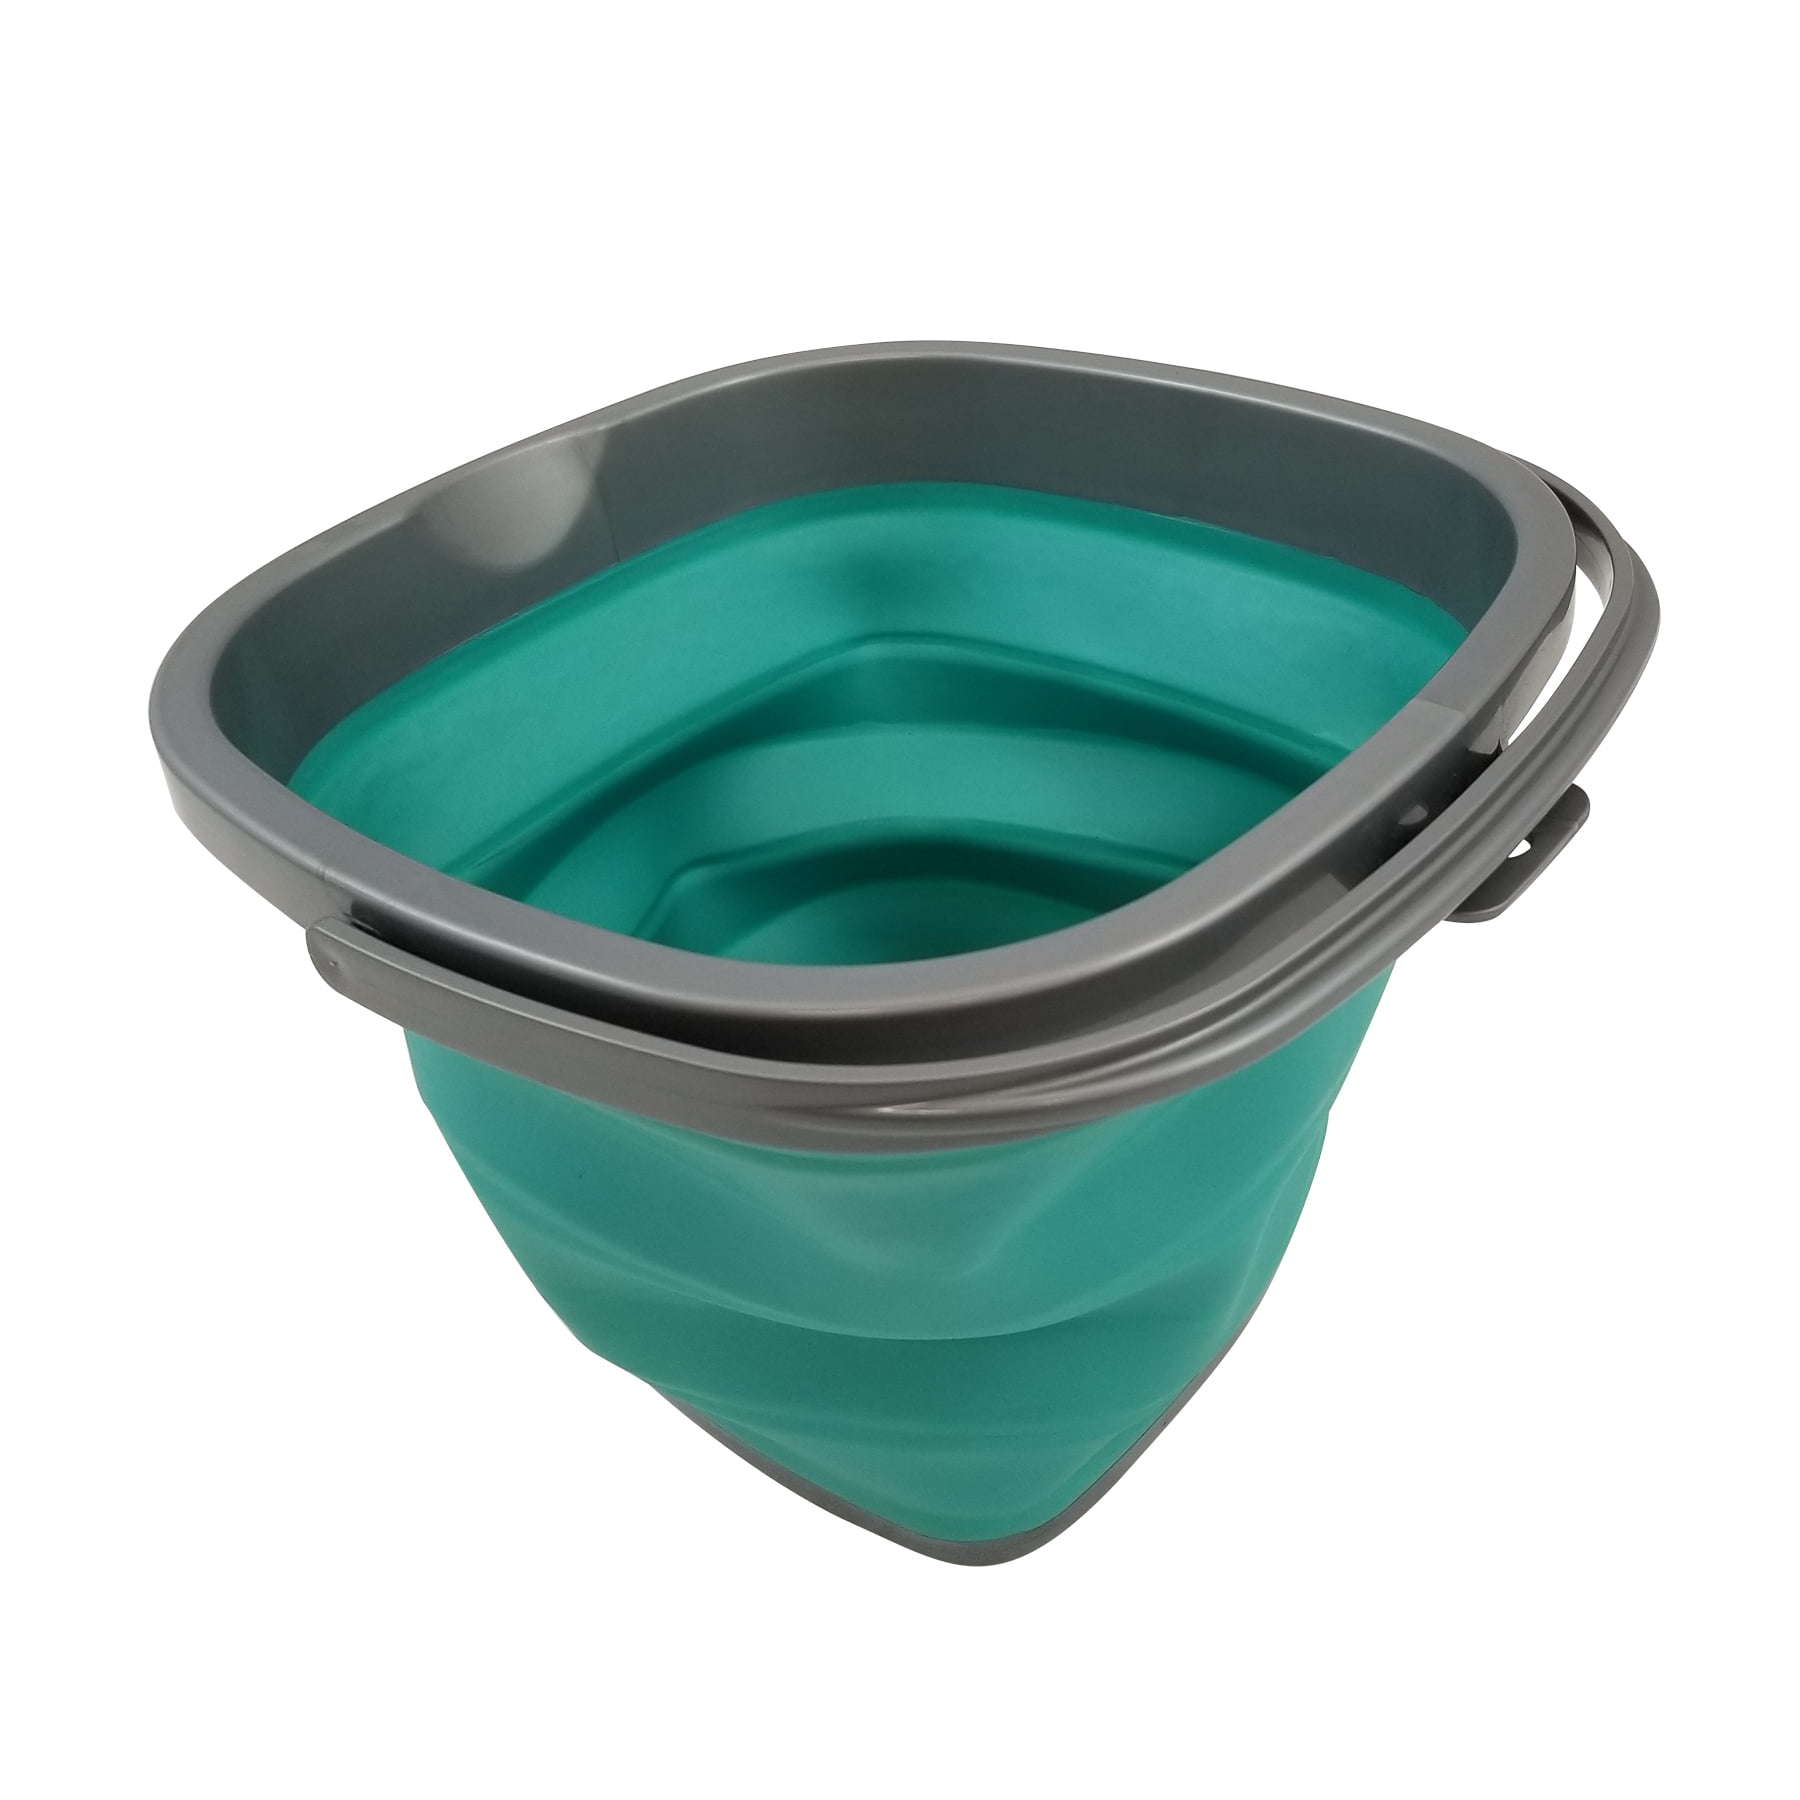 Details about   Folding Collapsible Silicon Plastic Bucket Kitchen Camping Garden Water Carrier 